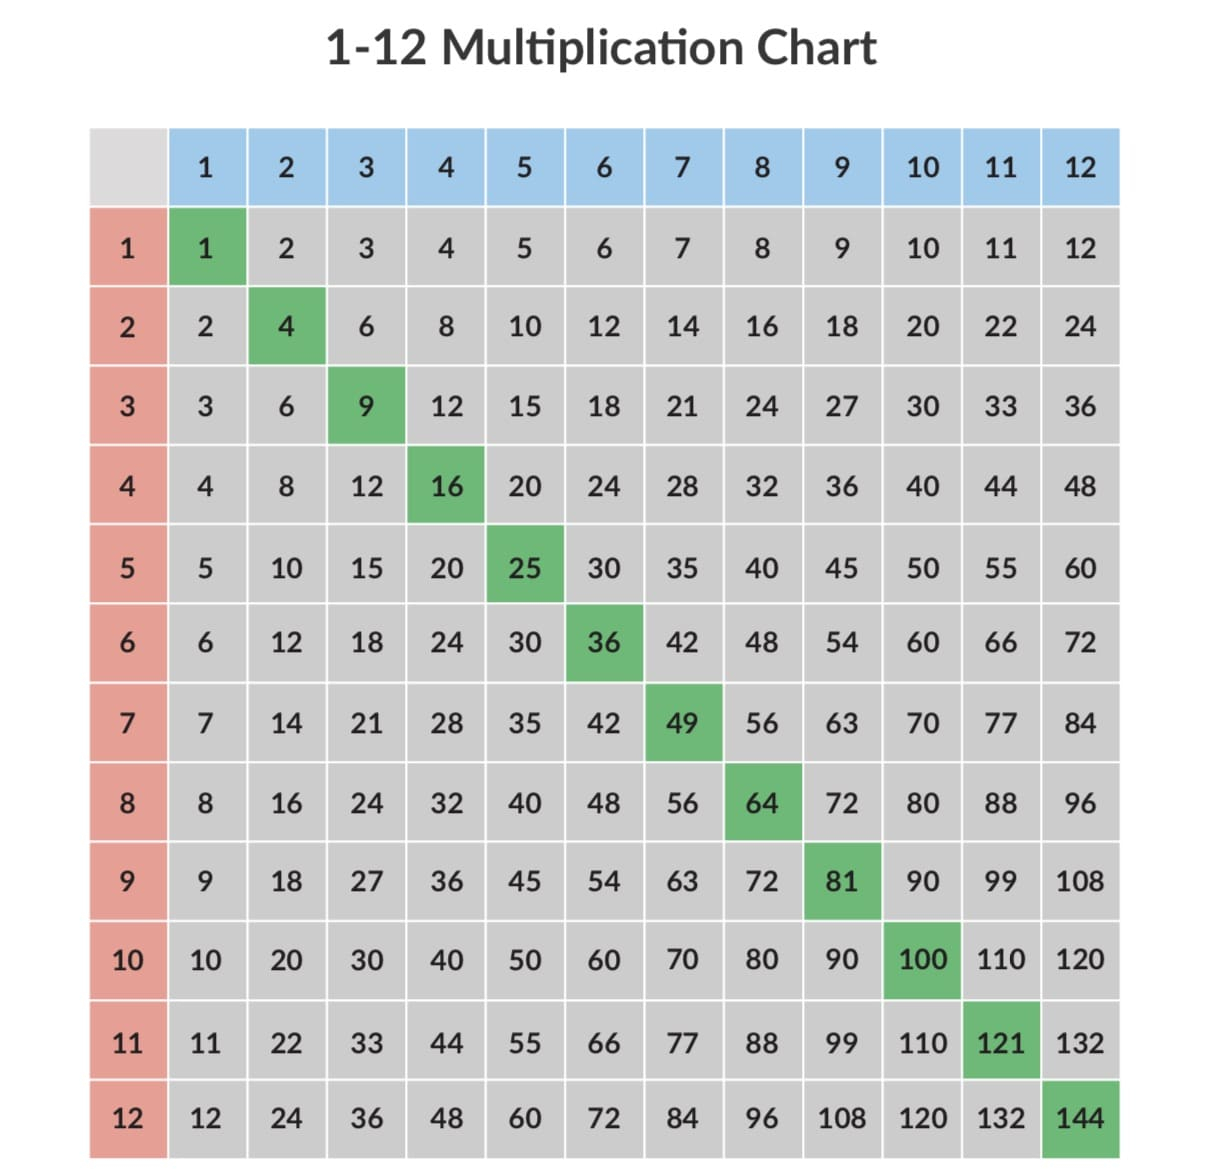 Multiplication Charts: 1-12 &amp;amp; 1-100 [Free And Printable within Printable Multiplication Chart 1-12 Pdf